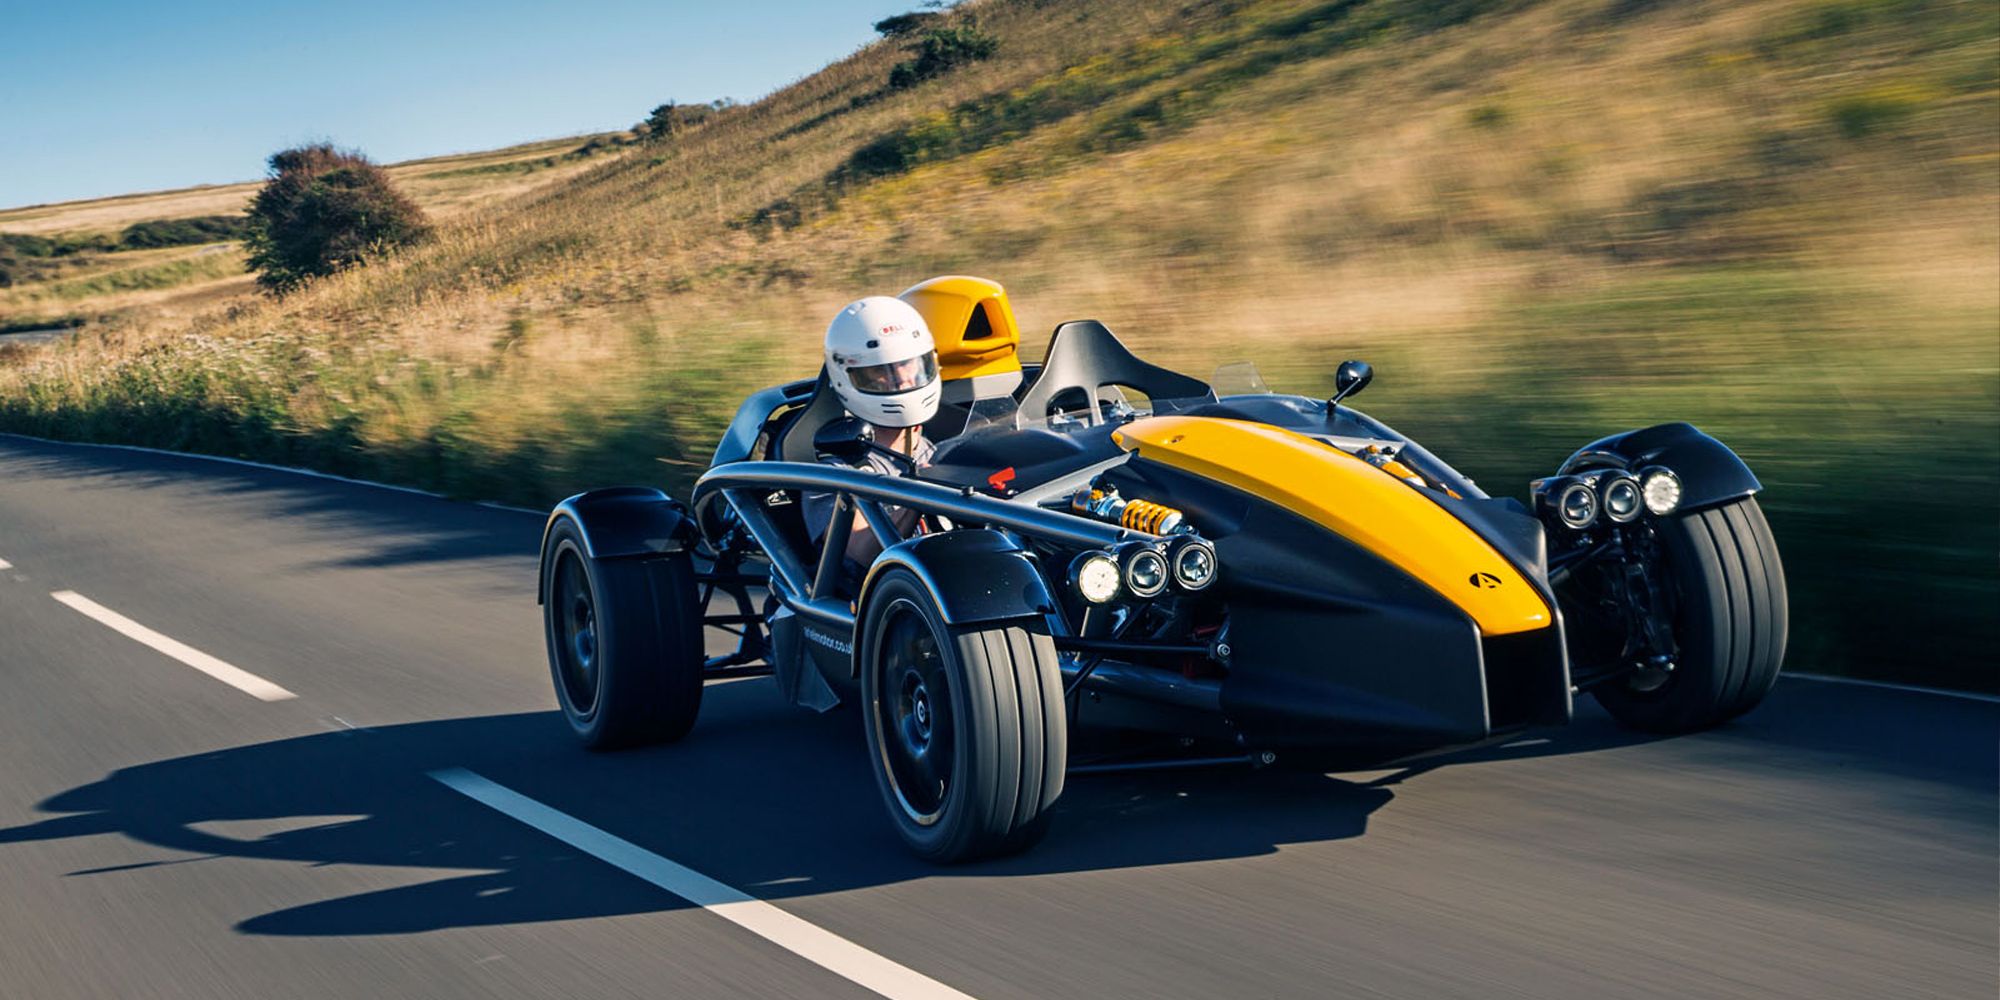 The front of the new Ariel Atom 4